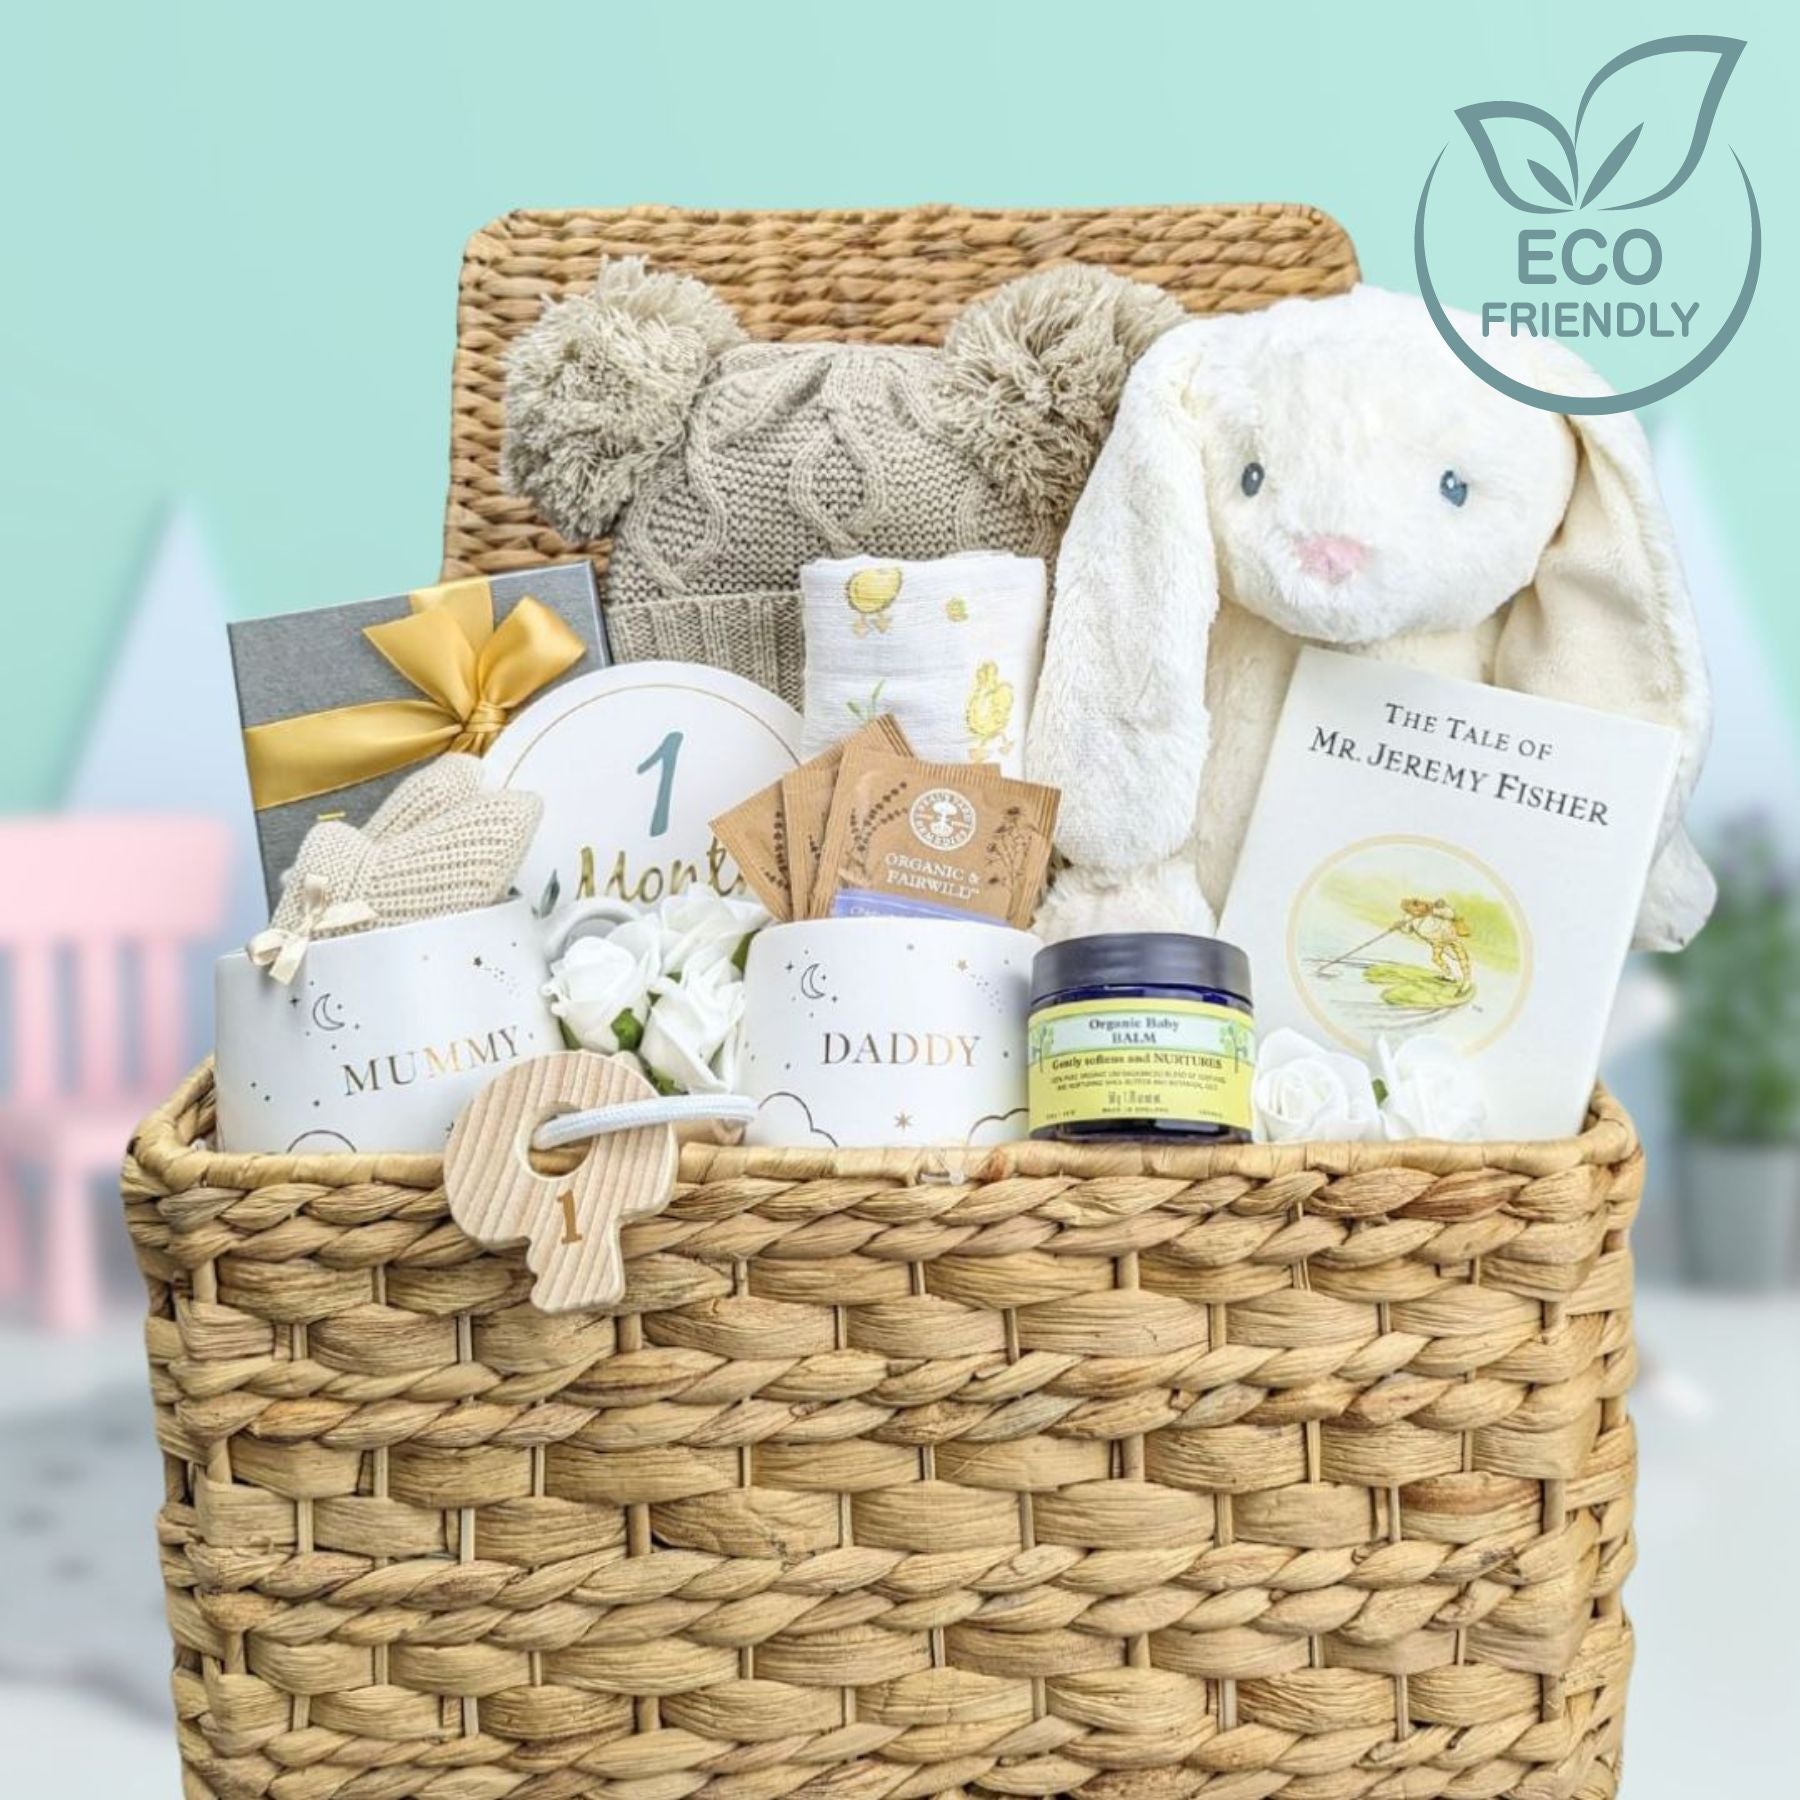 New Parent & Baby 'ECO' Basket - Sweet Lullaby New Mum Hampers